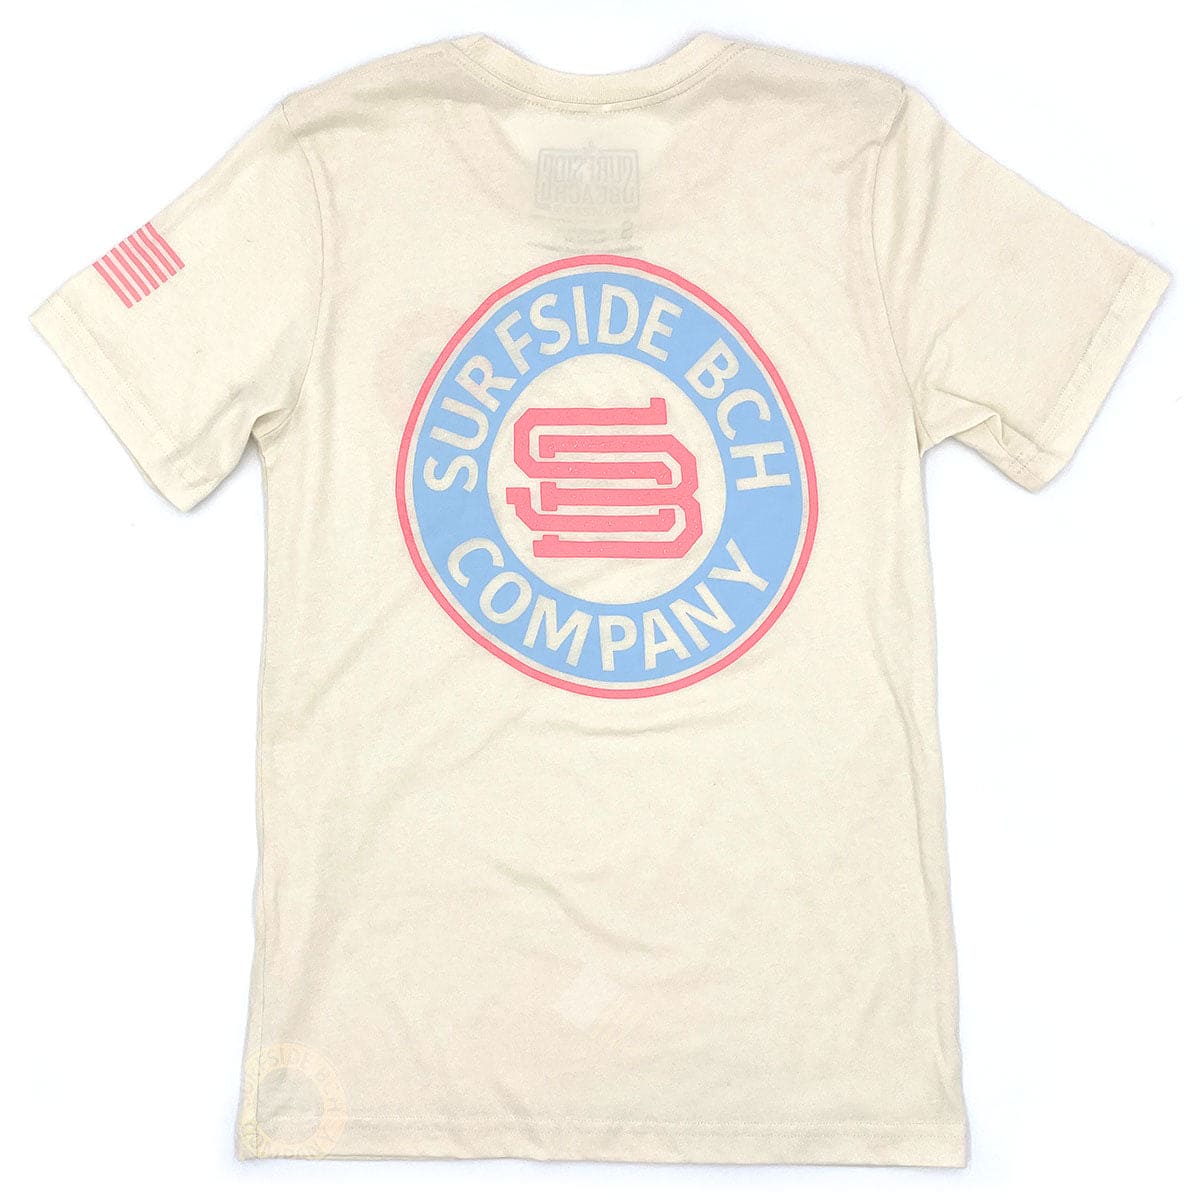 Surfside Bch Company (Made in the USA) Unisex T-Shirt